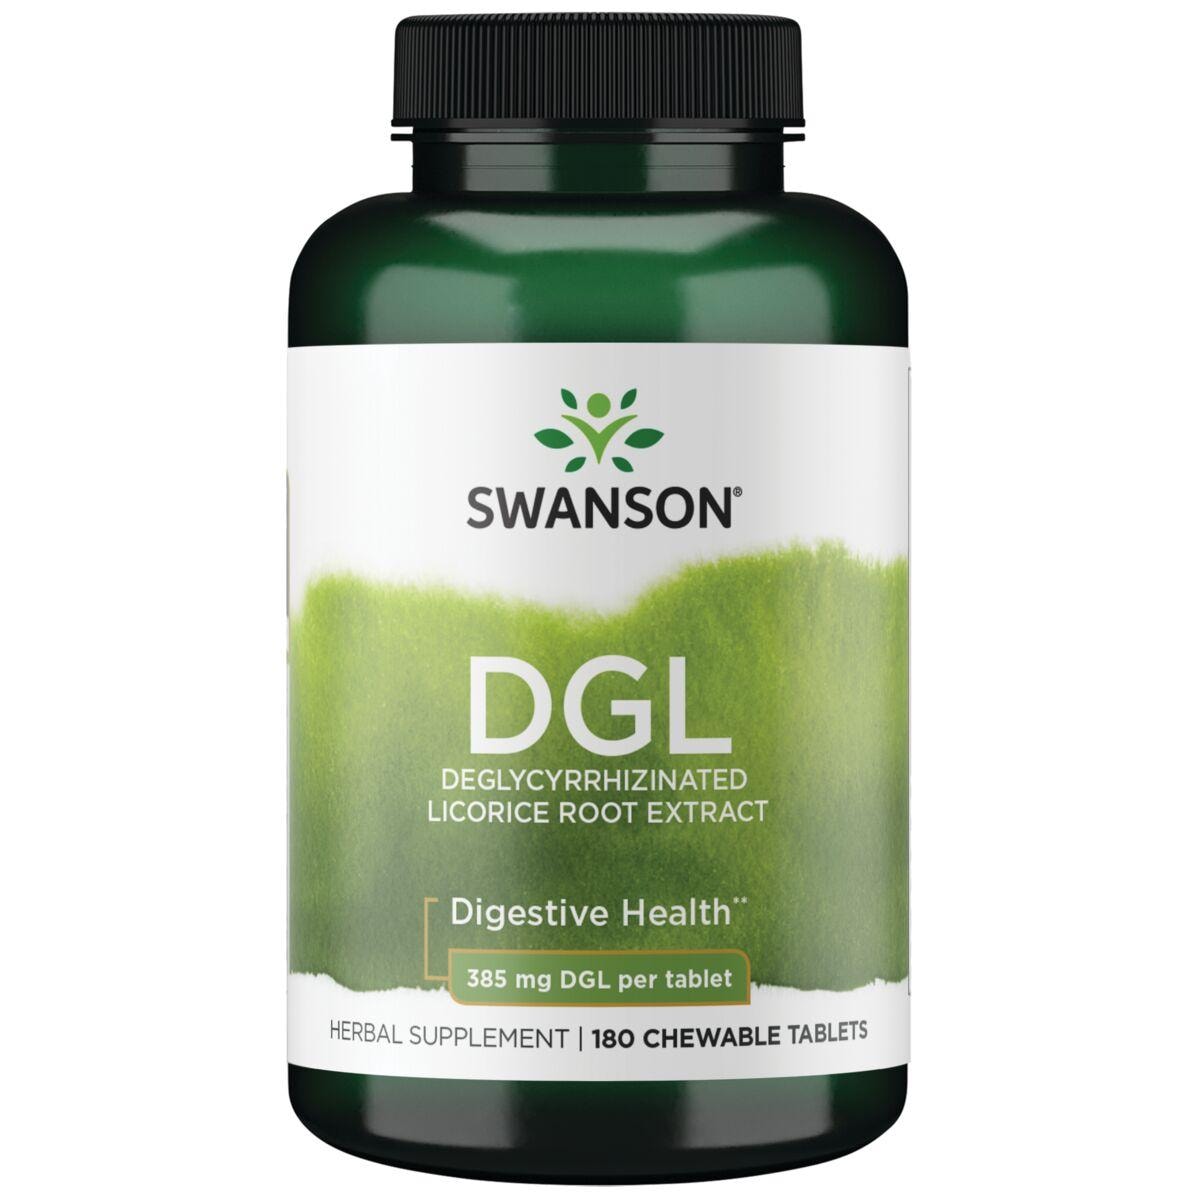 Swanson Superior Herbs Dgl Deglycyrrhizinated Licorice Root Extract Vitamin | 385 mg | 180 Chewables